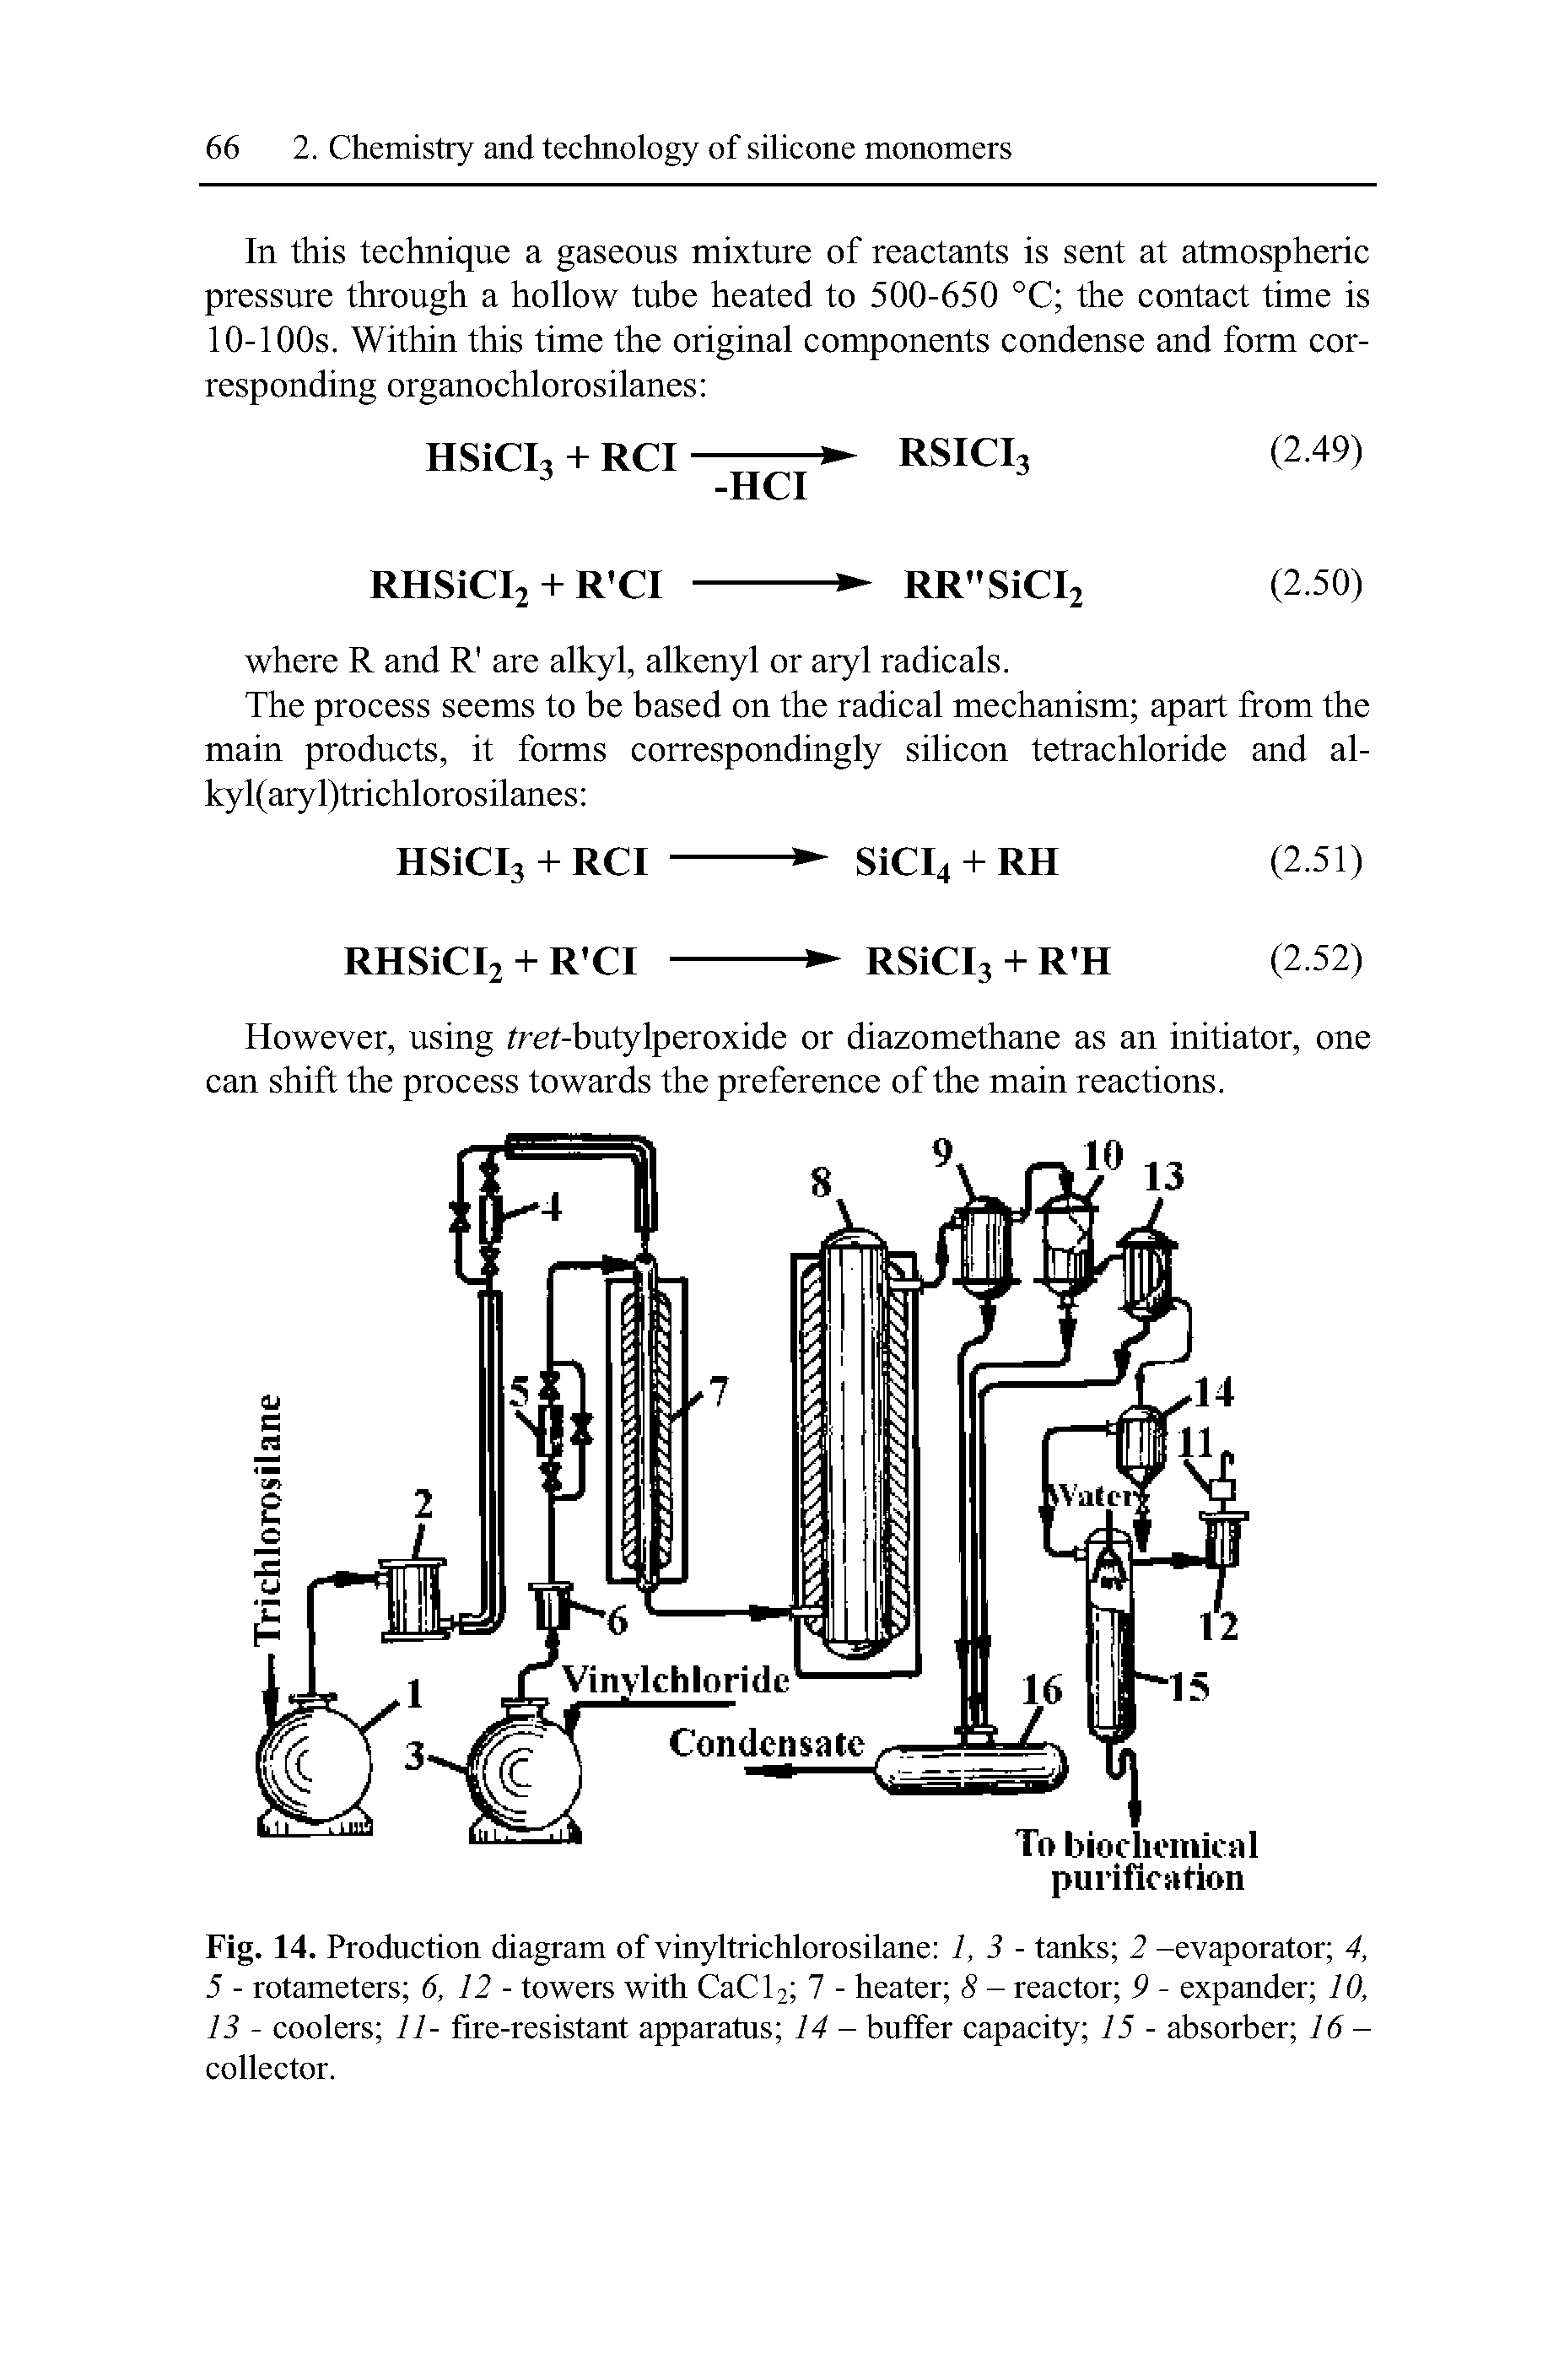 Fig. 14. Production diagram of vinyltrichlorosilane 1,3- tanks 2 -evaporator 4, 5 - rotameters 6, 12 - towers with CaCl2 7 - heater 8 - reactor 9 - expander 10, 13 - coolers 11- fire-resistant apparatus 14 - buffer capacity 15 - absorber 16 -collector.